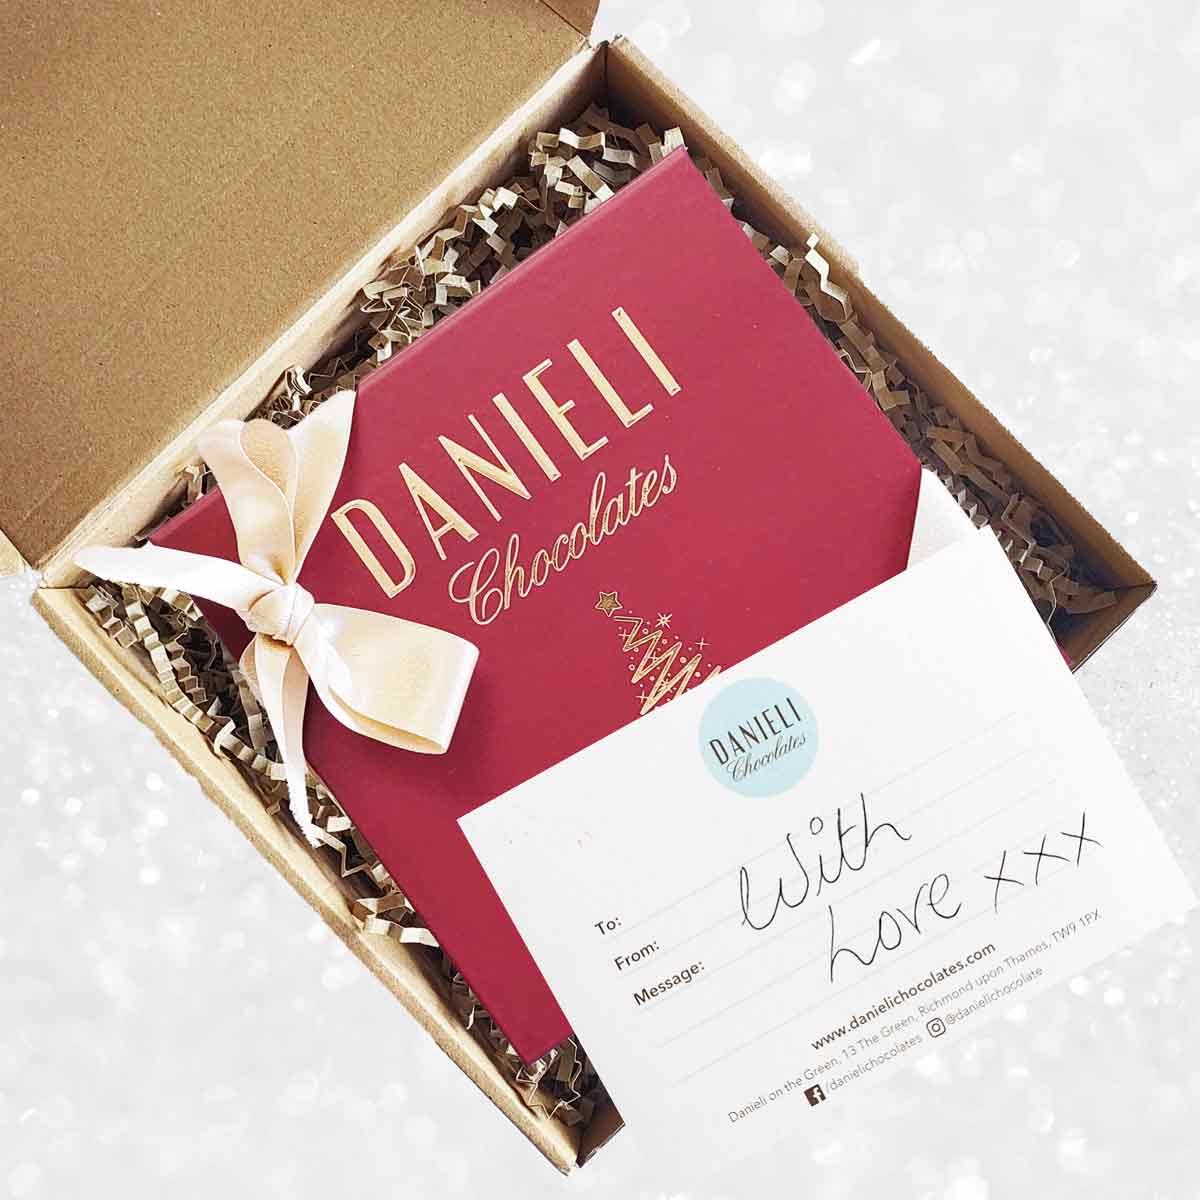 delivery box view of Danieli chocolates for Christmas luxury red box with a gold ribbon on a snowy background